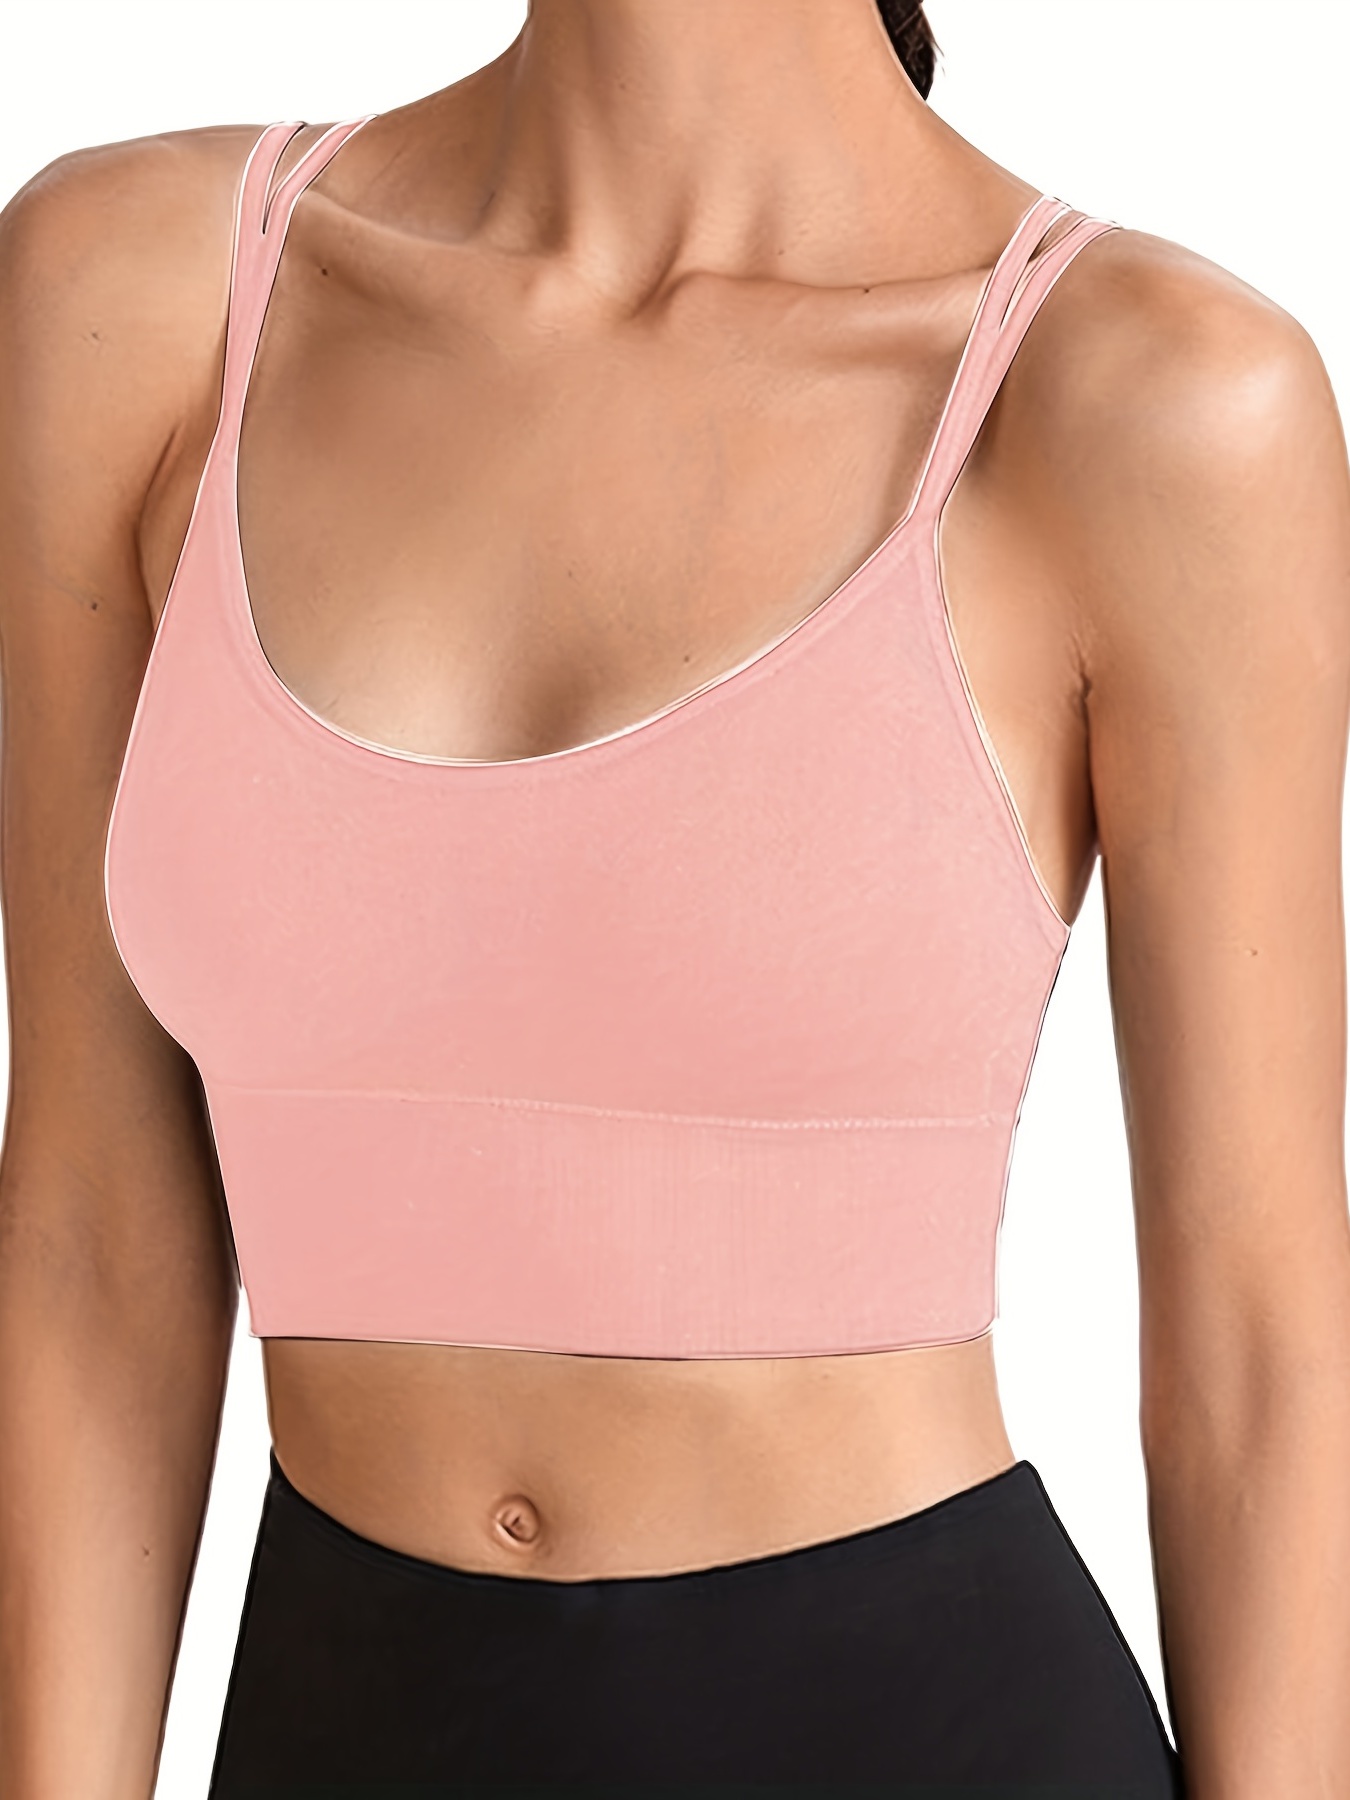 Spencer Women's Seamless Sports Bra Mesh Removable Pad Yoga Lingerie Bras  Racerback High Impact Workout Crop Tops L,Rose Red